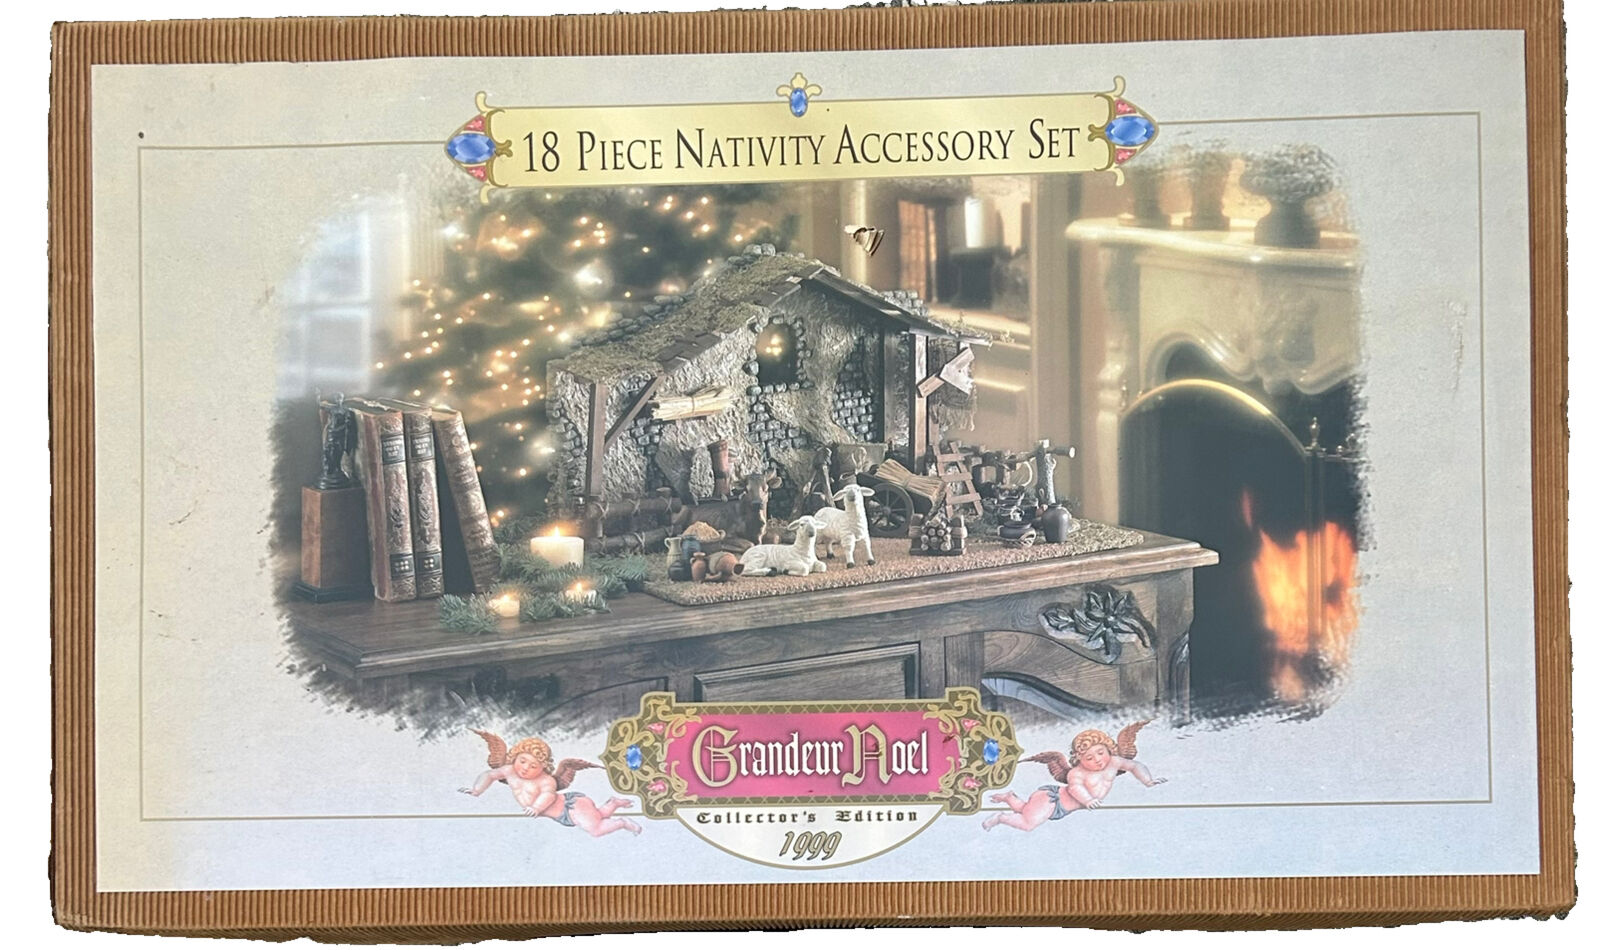 Grandeur Noel 18pc Nativity Accessories 1999 Collectors Ed Pick Up ONLY Tampa